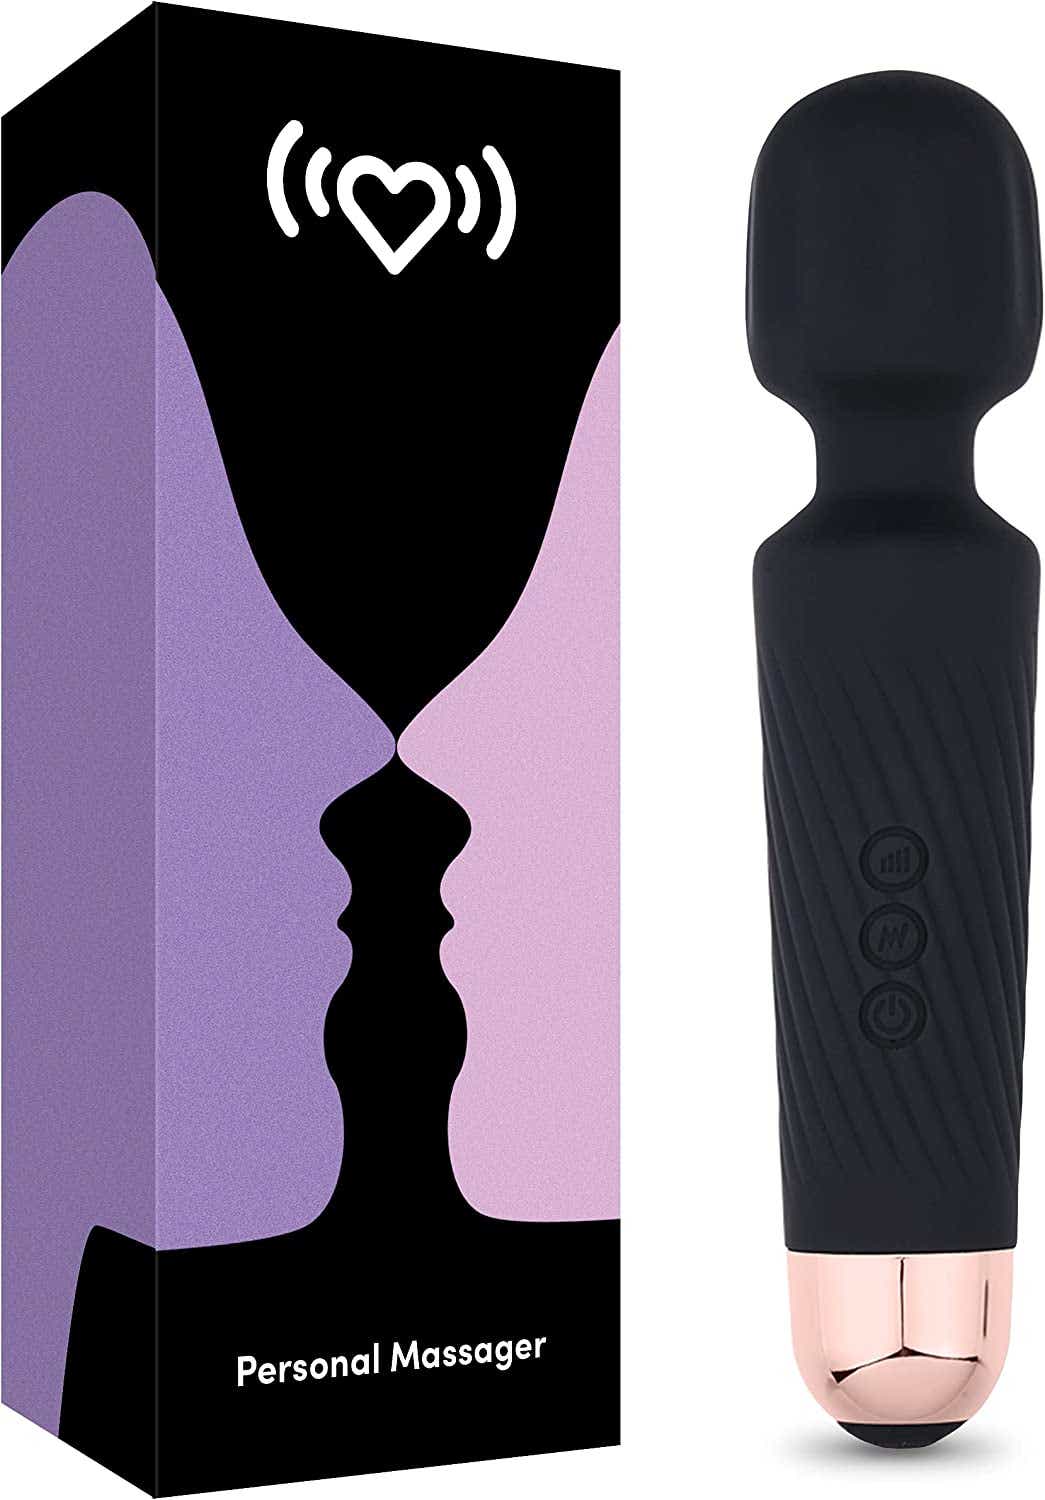 Rechargeable Vibrator - 20 Patterns & 8 Speeds - G-Spot Wand Vibrator Clit, Sex Toys, Vibrator for Her Pleasure, Quiet & Small Vibrator, Dildo, Personal Wand Massager, Female Adult Toys (Black)